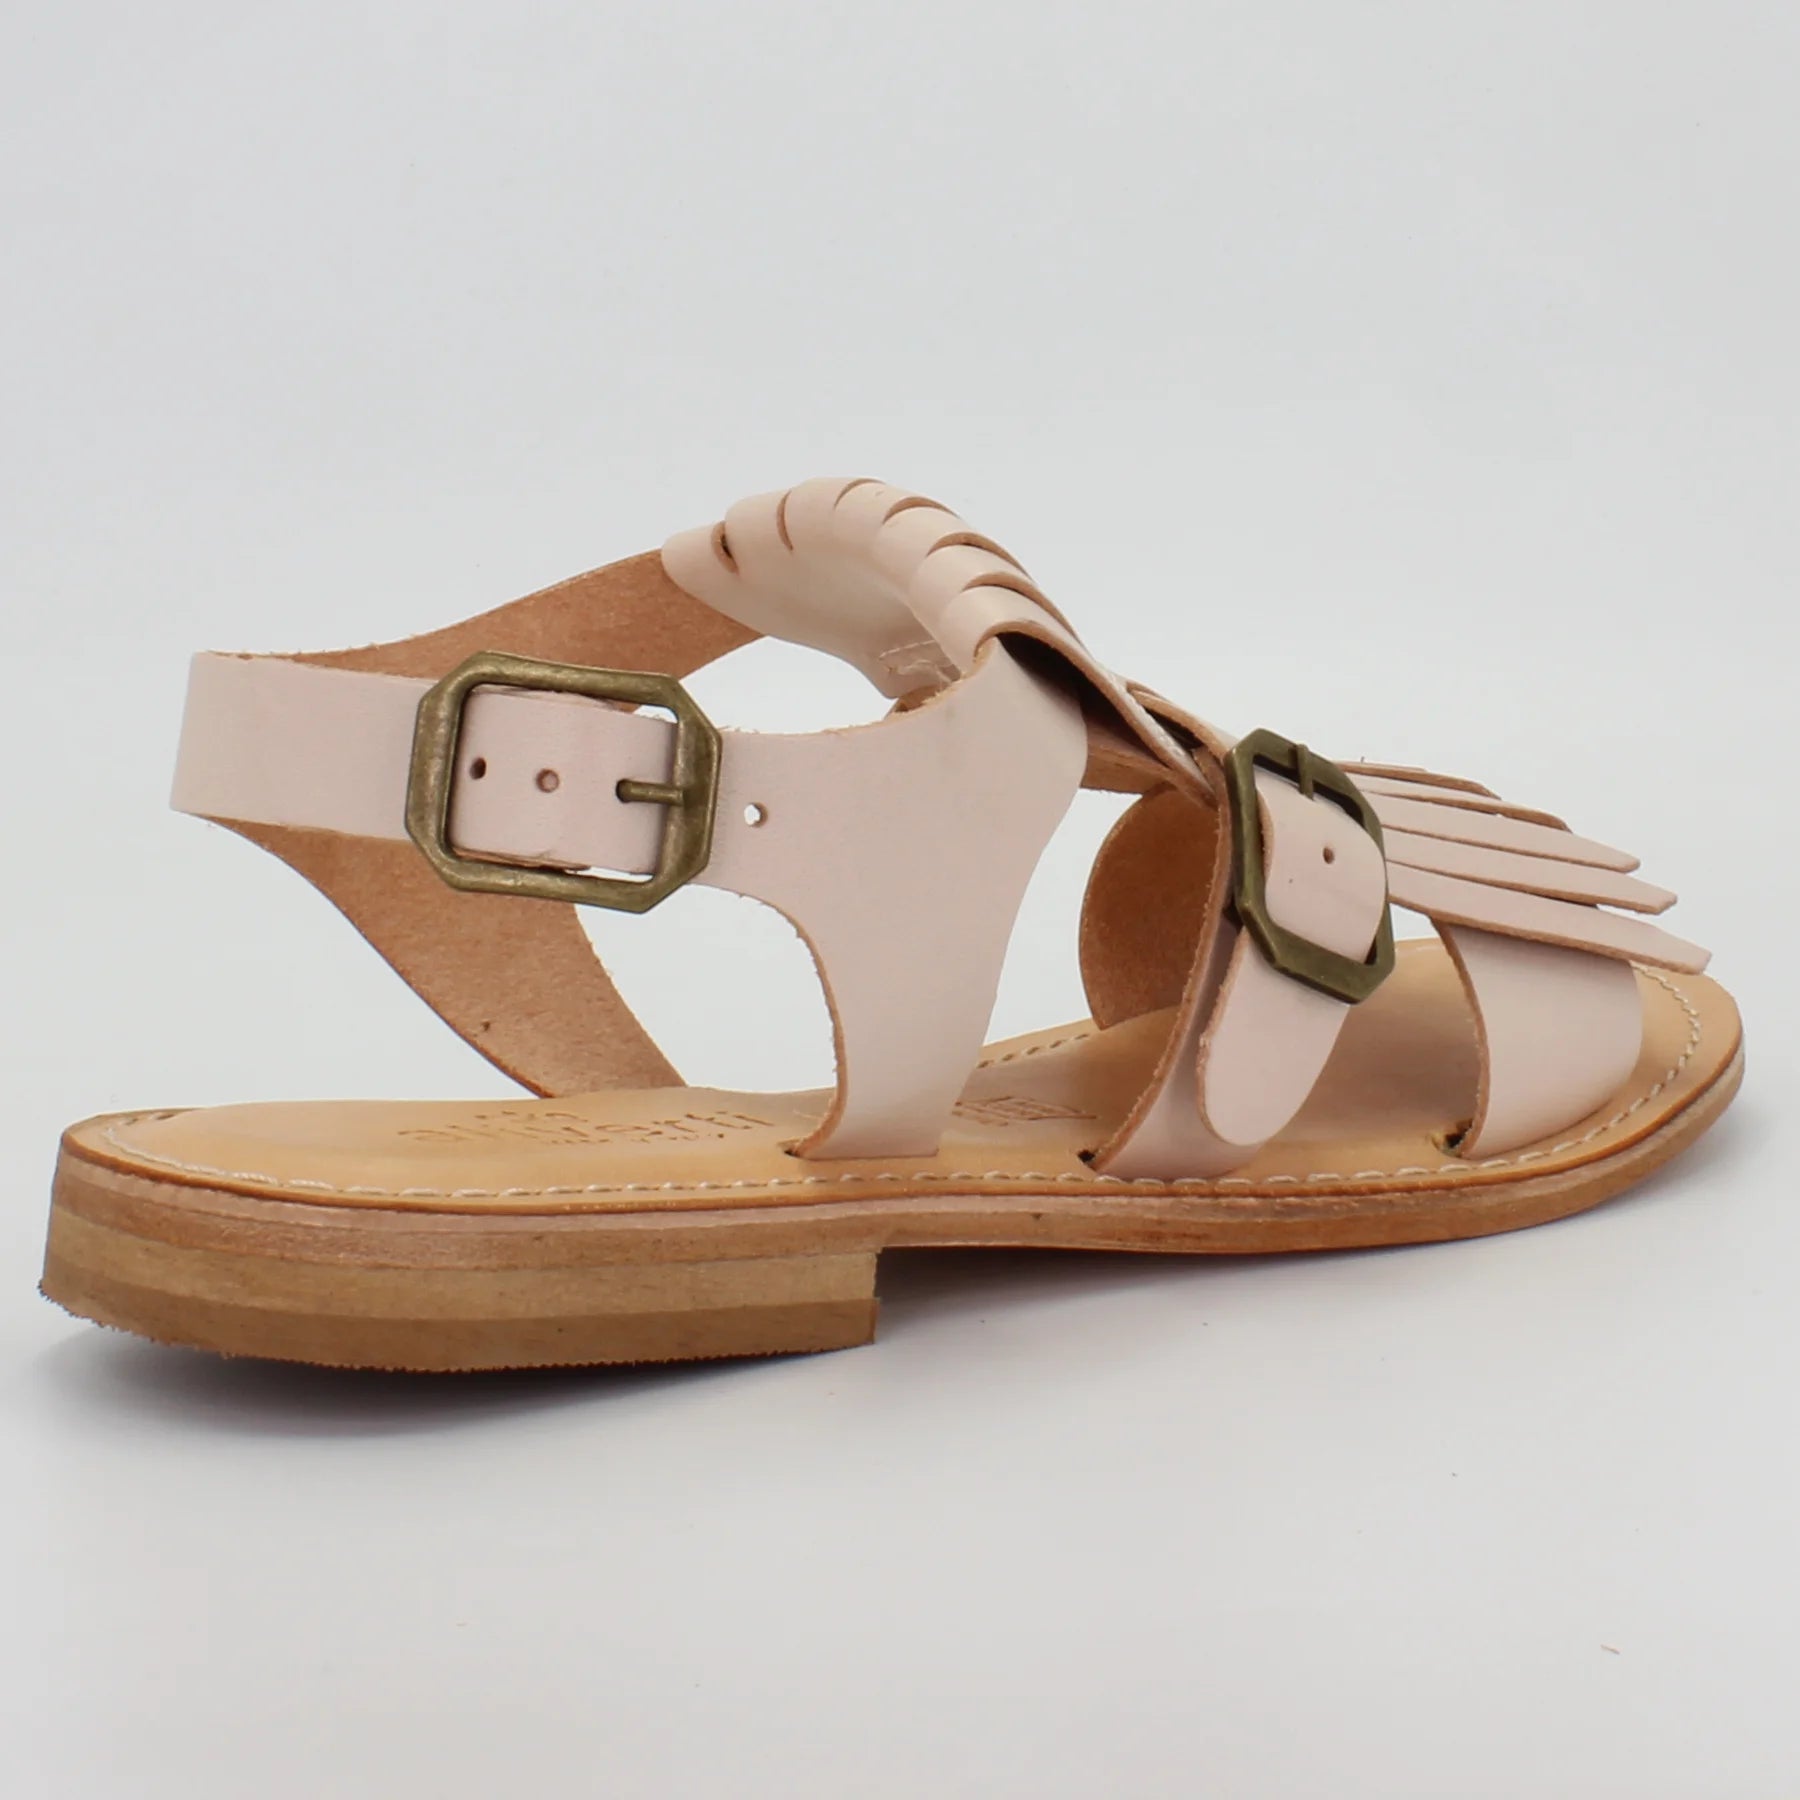 Shop Handmade Italian Leather sandal in latte (1361) or browse our range of hand-made Italian shoes in leather or suede in-store at Aliverti Cape Town, or shop online. We deliver in South Africa & offer multiple payment plans as well as accept multiple safe & secure payment methods.